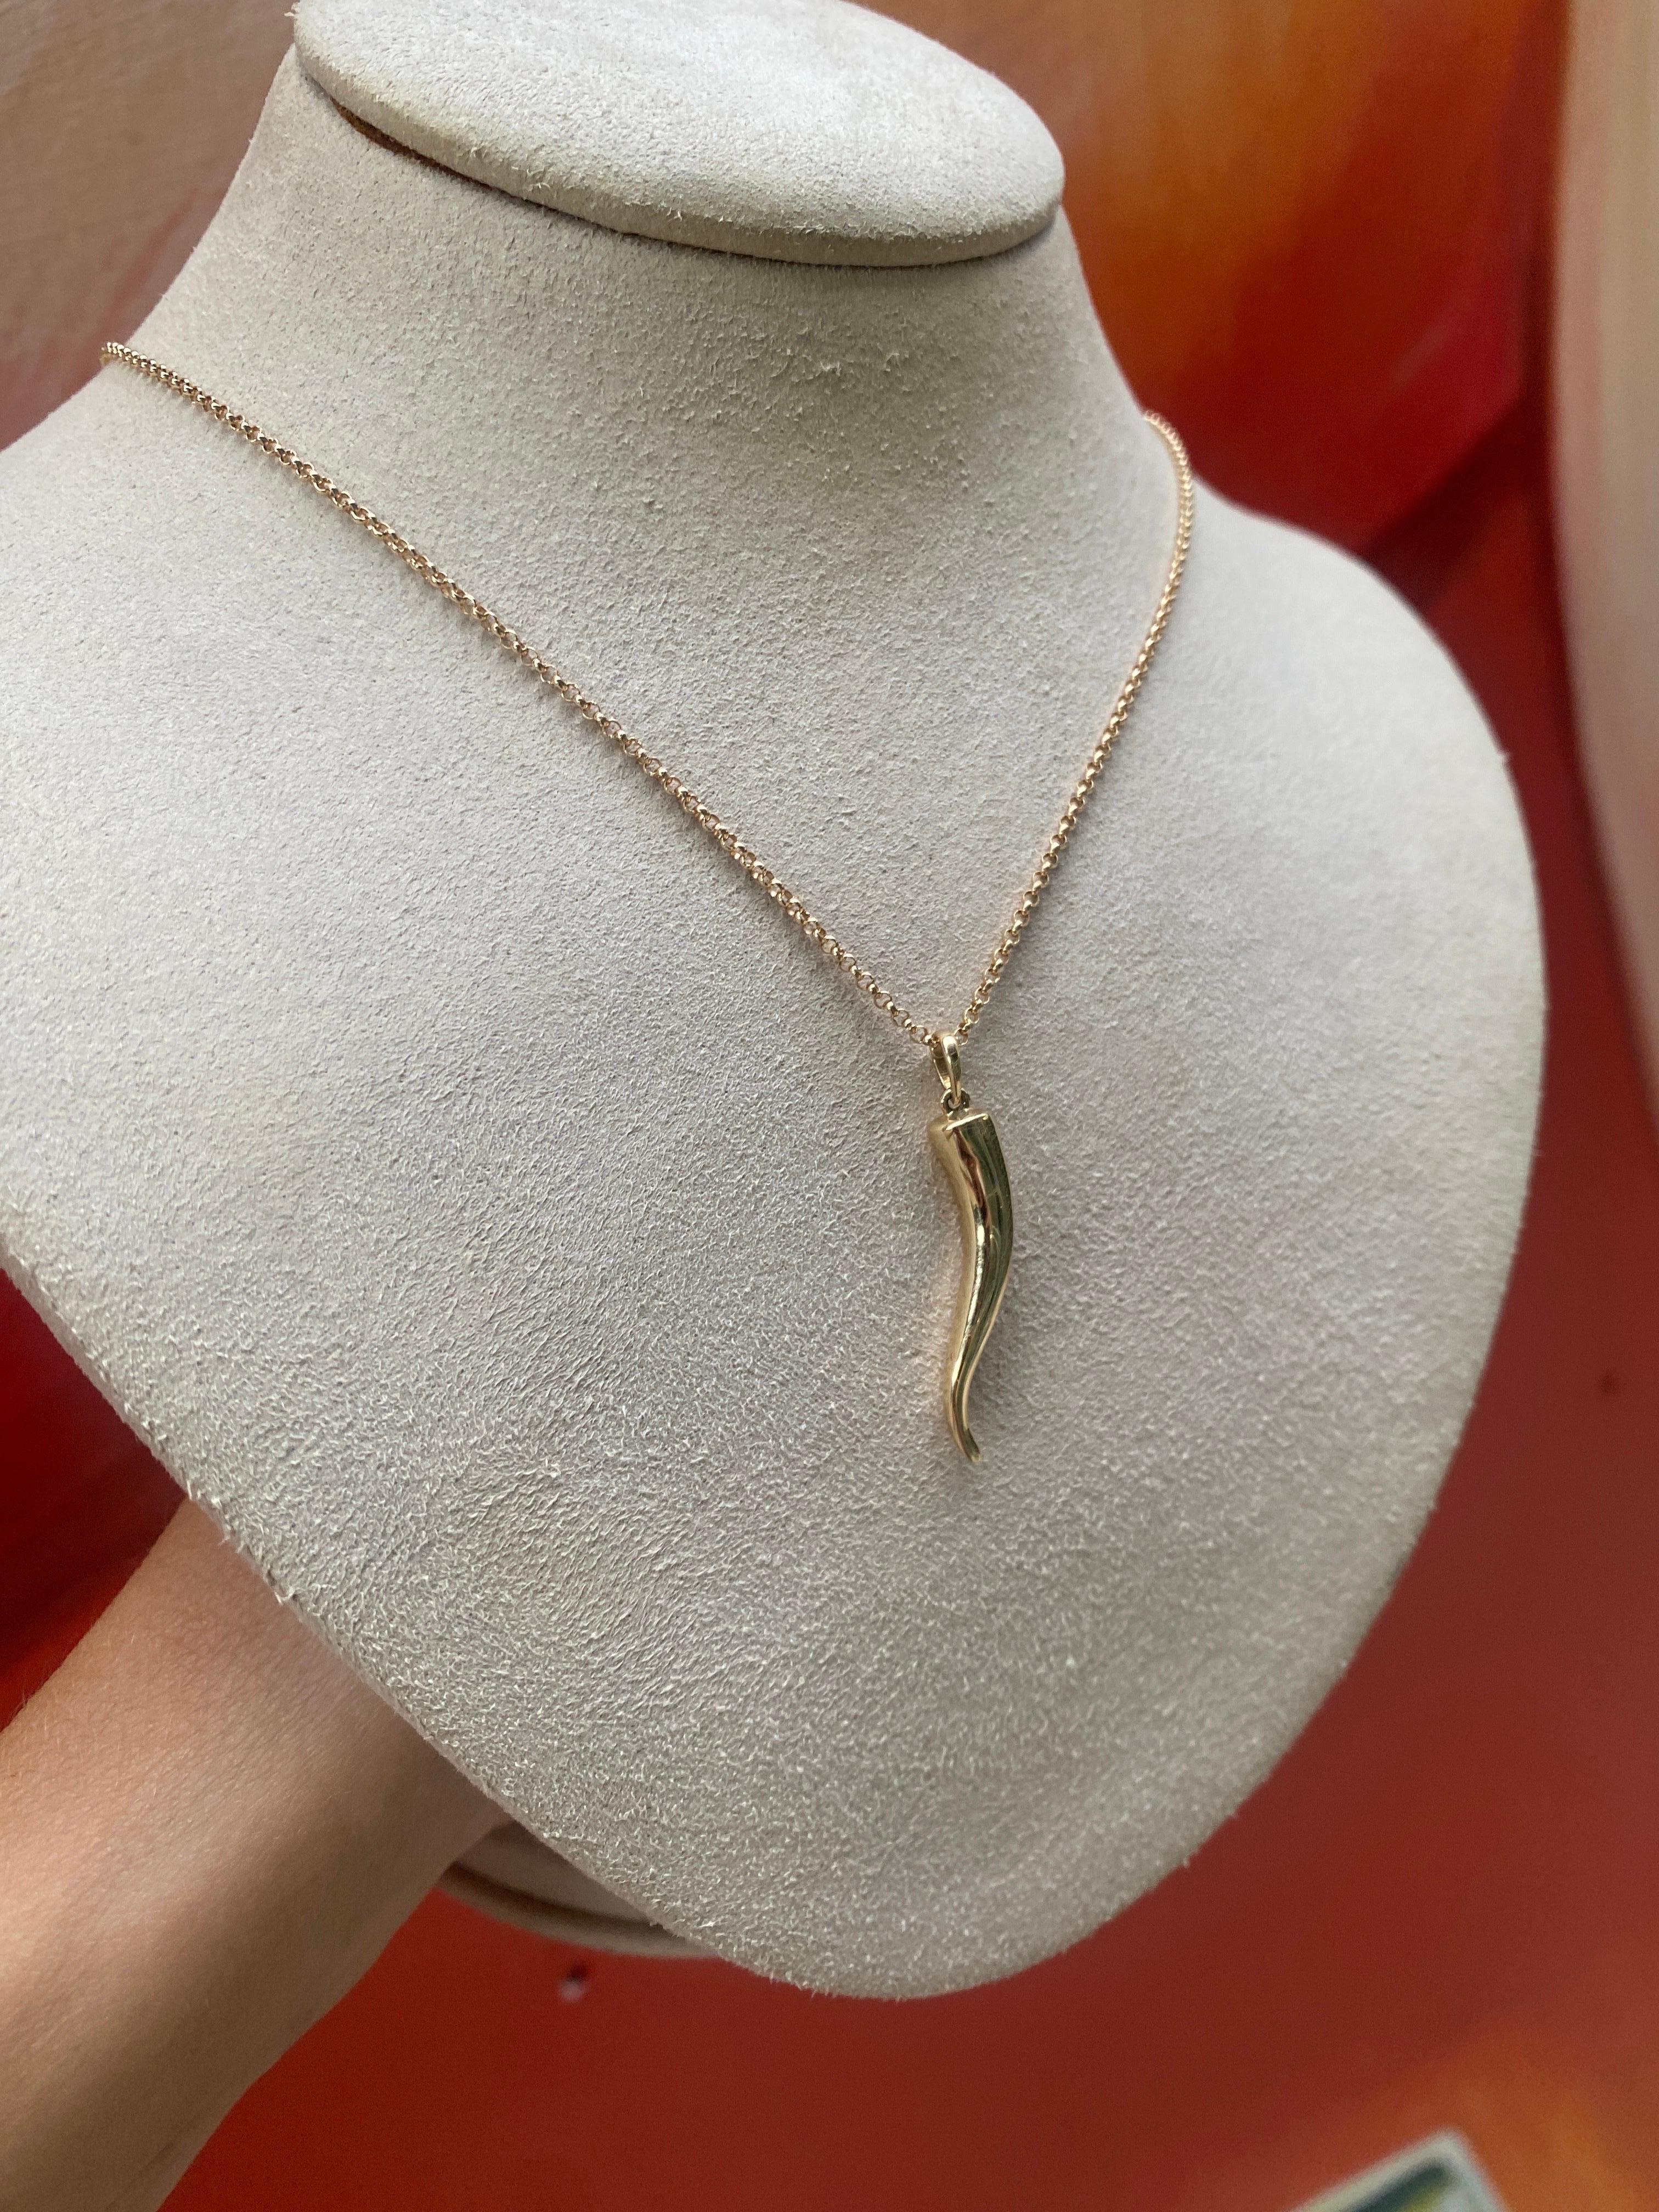 10K Gold Cornicello Italian Horn Pendant With 10K Miami Cuban Chain Necklace  Real 10K Yellow Gold Good Luck Charm 10K Gold Pendant - Etsy